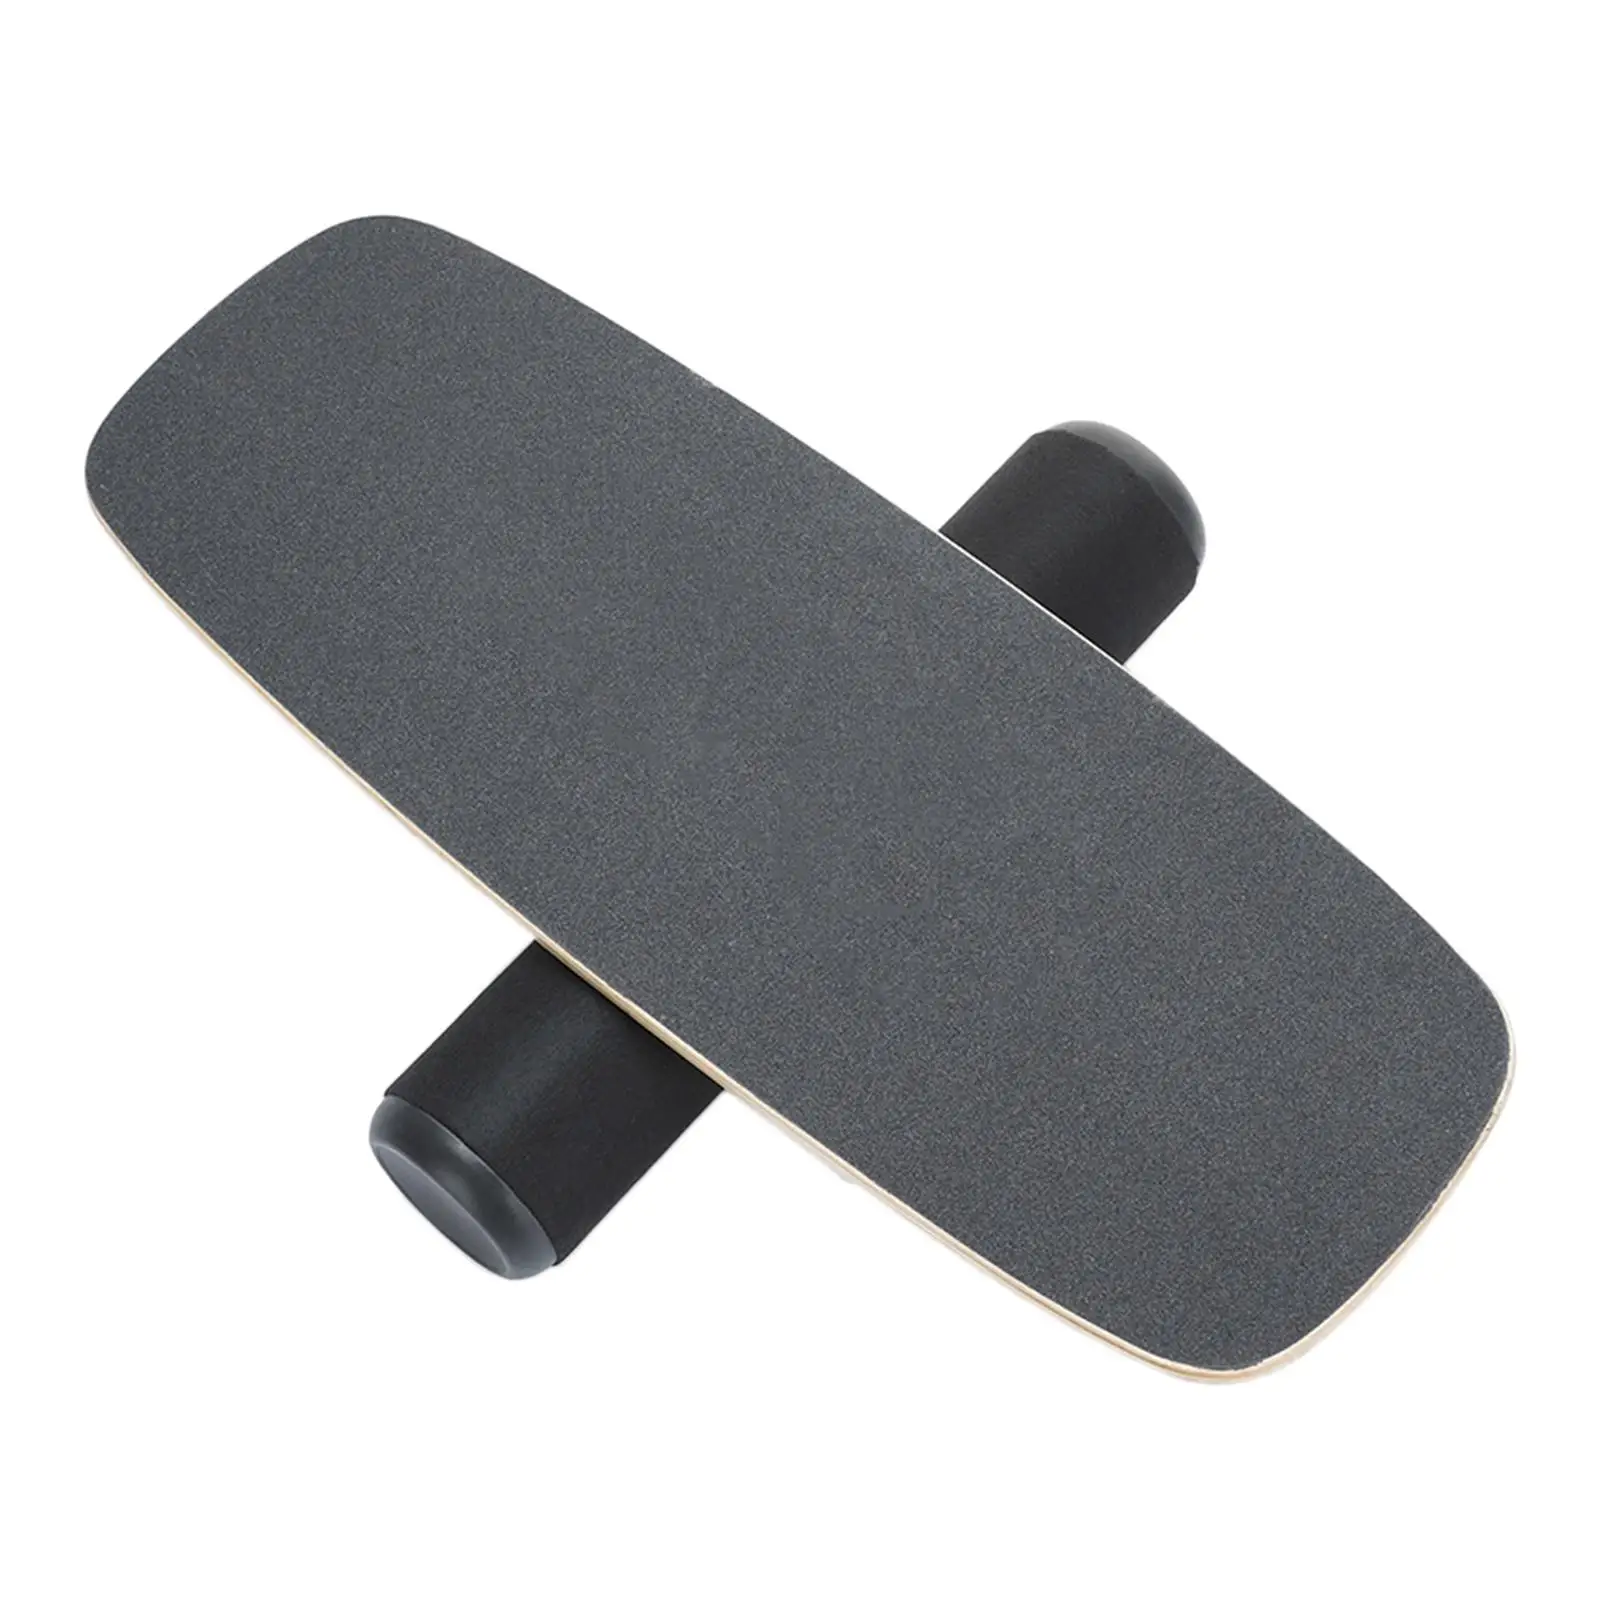 Balance Board Trainer Exercise Equipment Core Strength Balance Training Stability Roller Gym Balancing Board for Snowboard